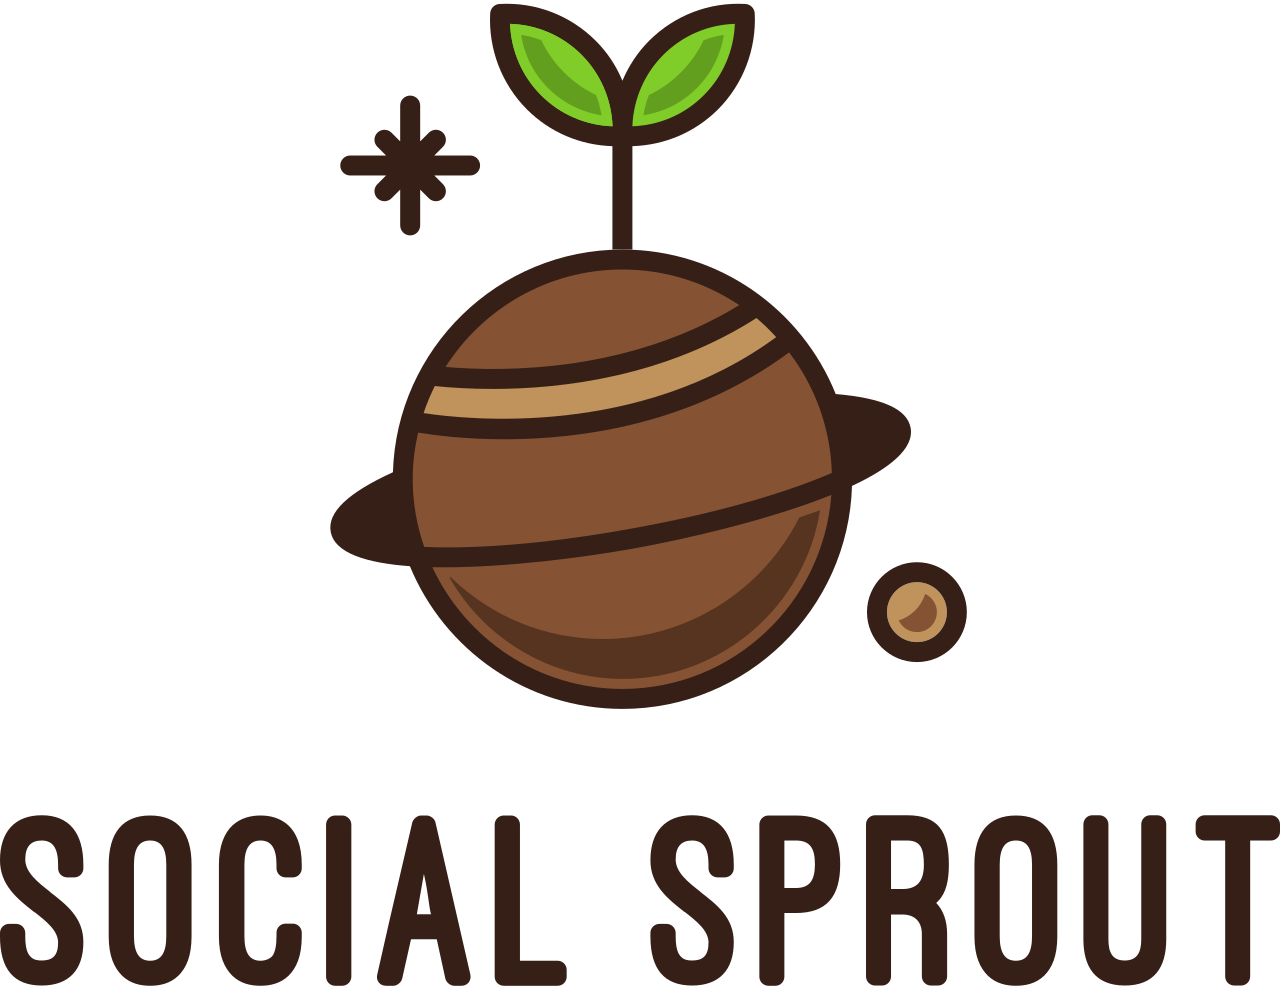 Social Sprout's web page